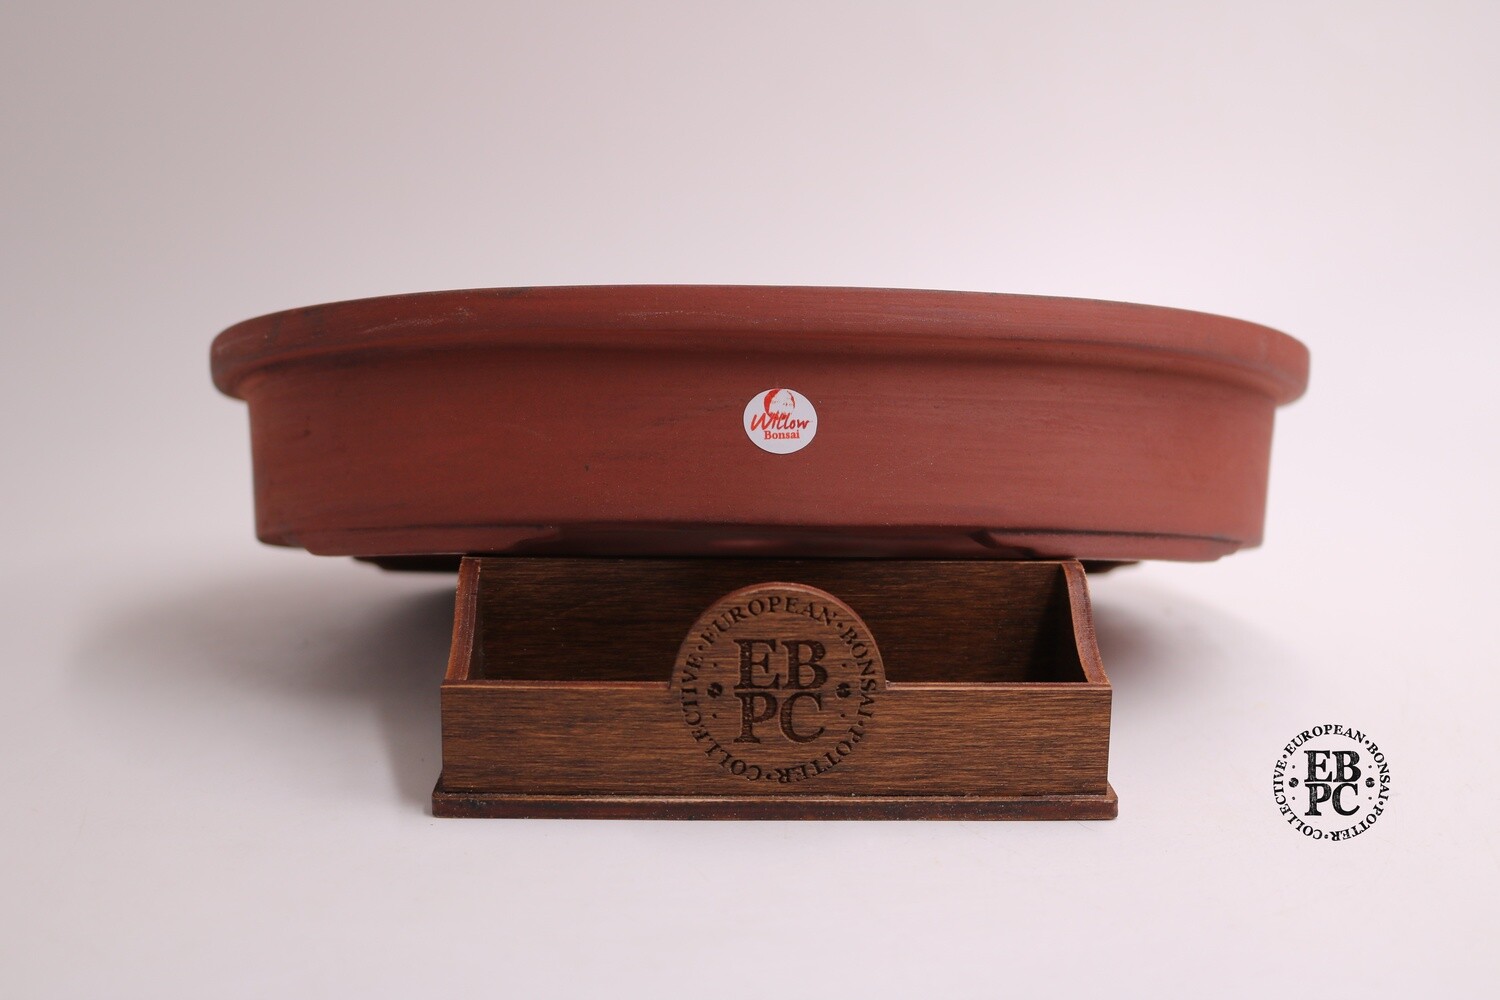 Willow Bonsai Pots. 24.8cm; Oval; Unglazed; Iron Red Finish; Recessed Feet; Lip to Rim; Made in South Africa.